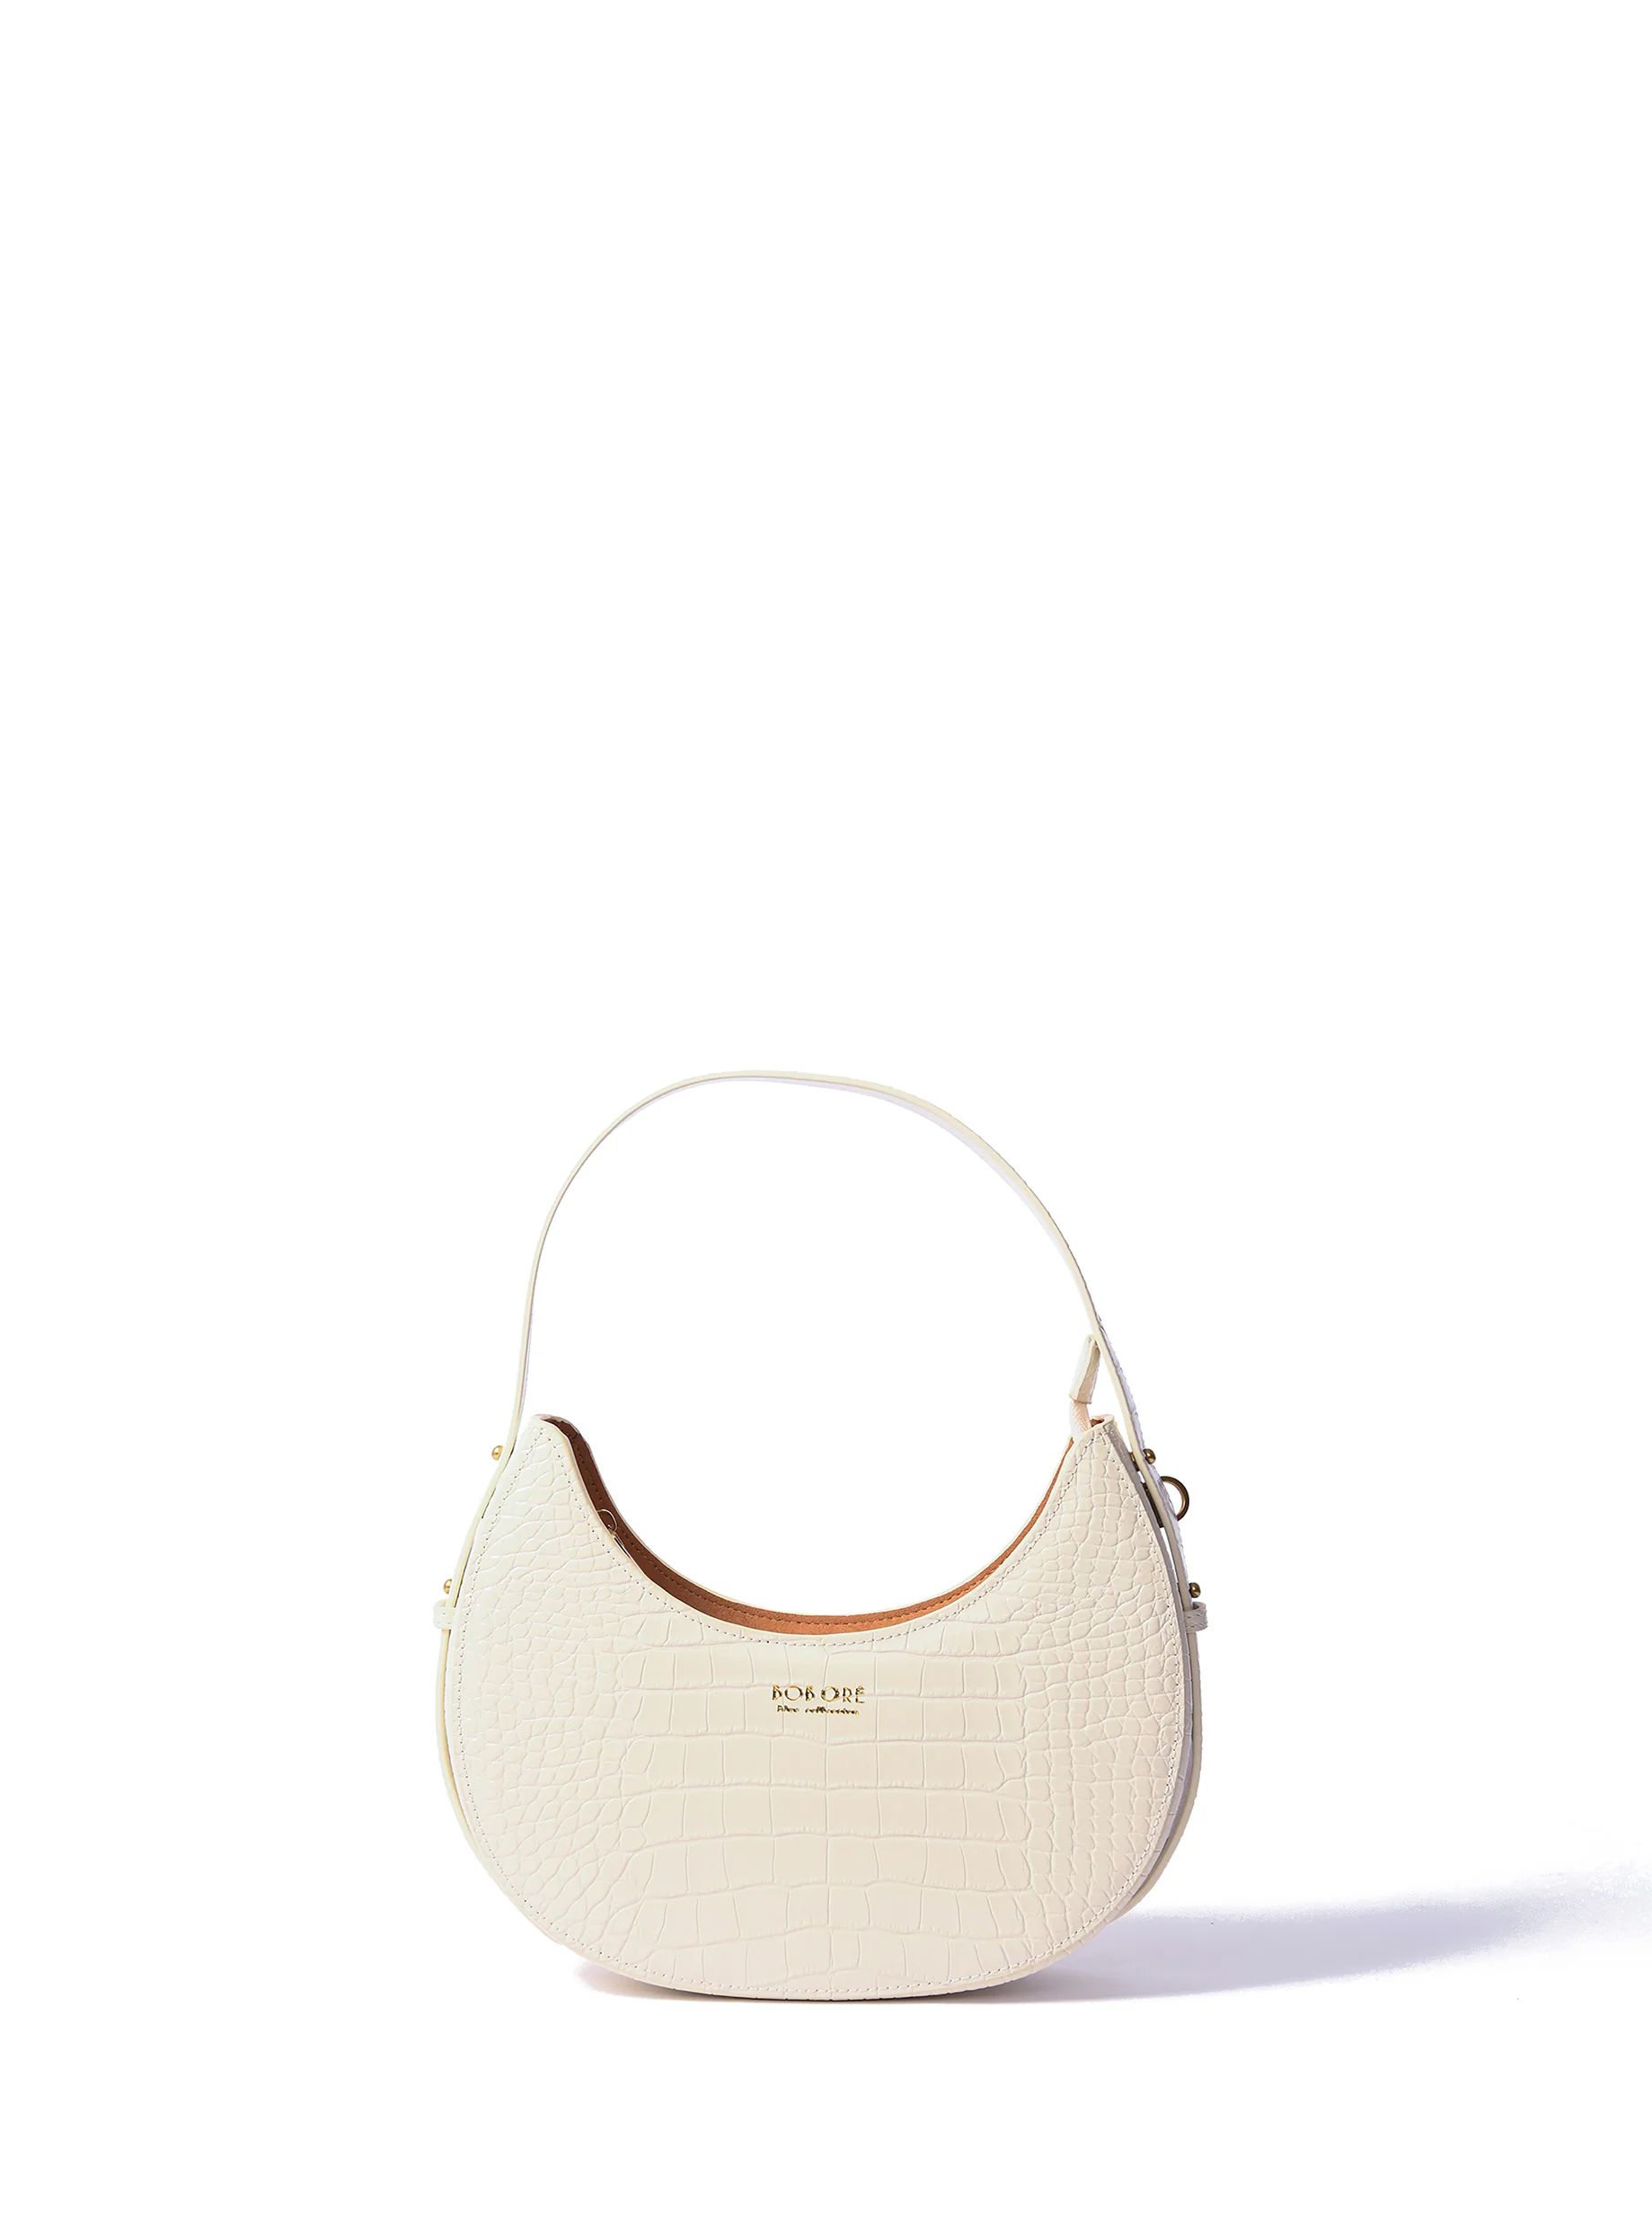 Naomi Leather Moon Bag with Croc-Embossed Pattern, White | Bob Ore Blue Collection